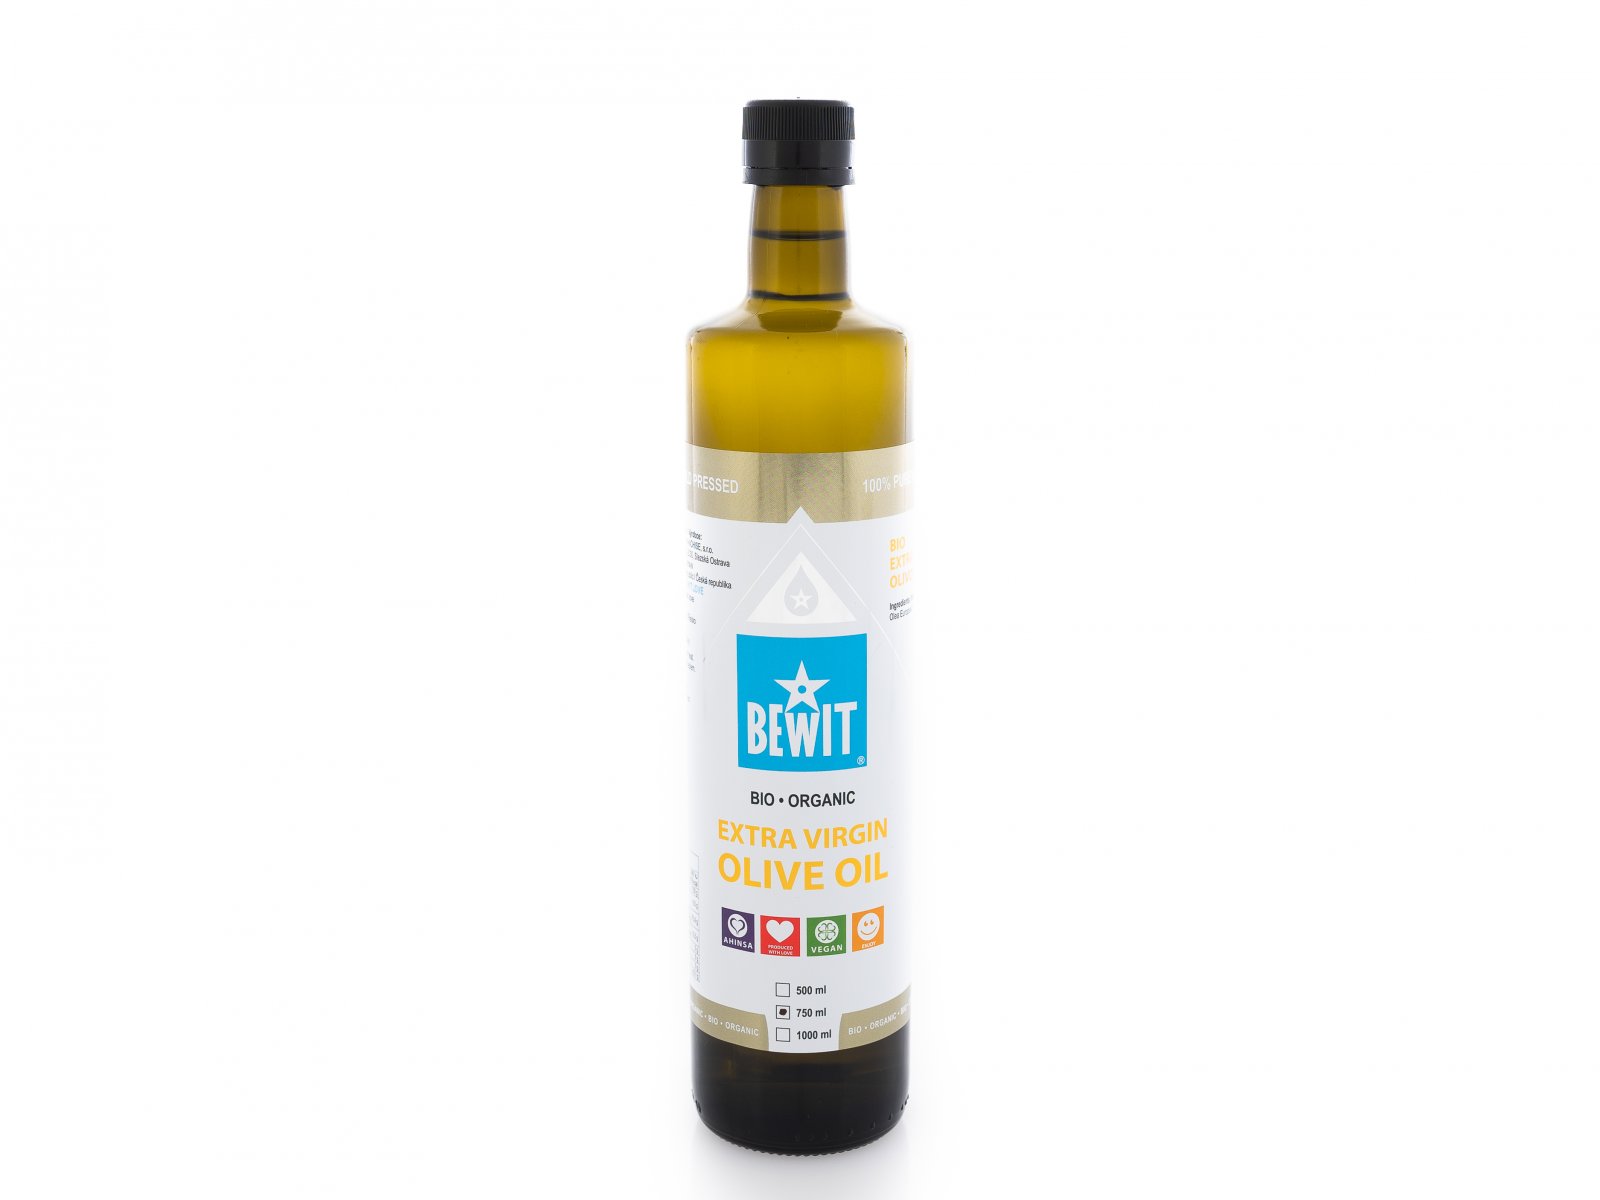 BEWIT Organic extra virgin olive oil from Crete - 